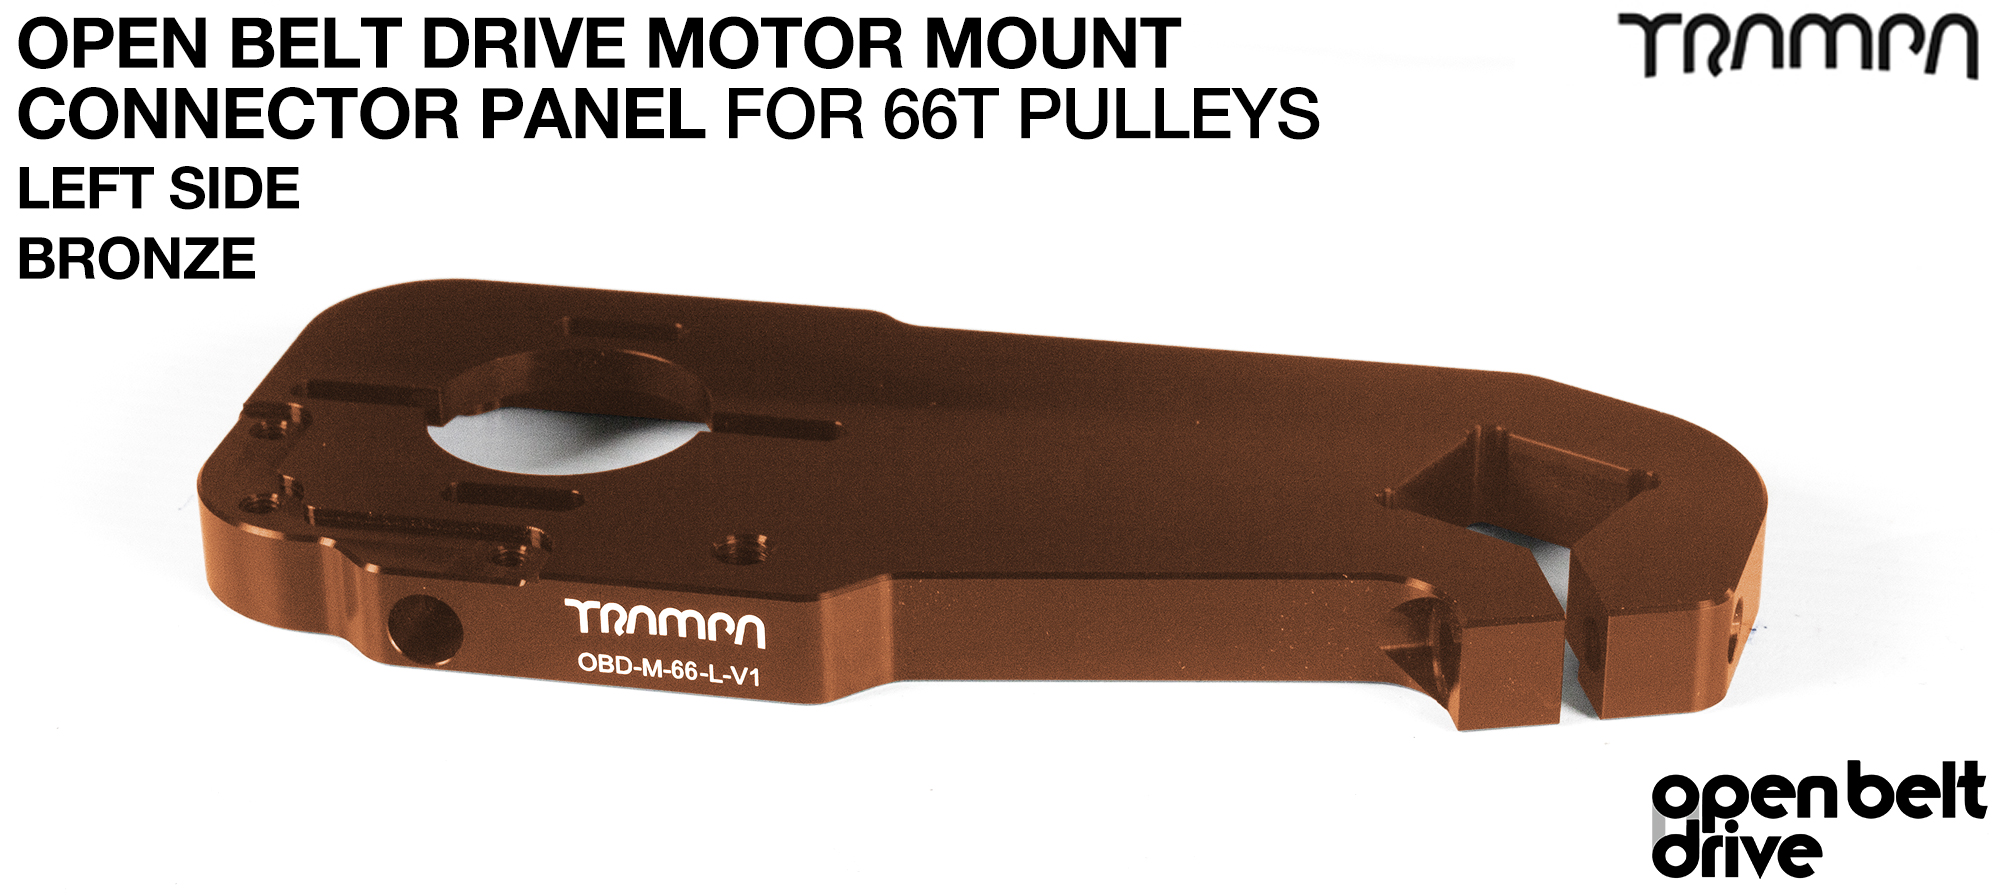 OBD Motor Mount Connector Panel for 66 tooth Pulleys - REGULAR - BRONZE